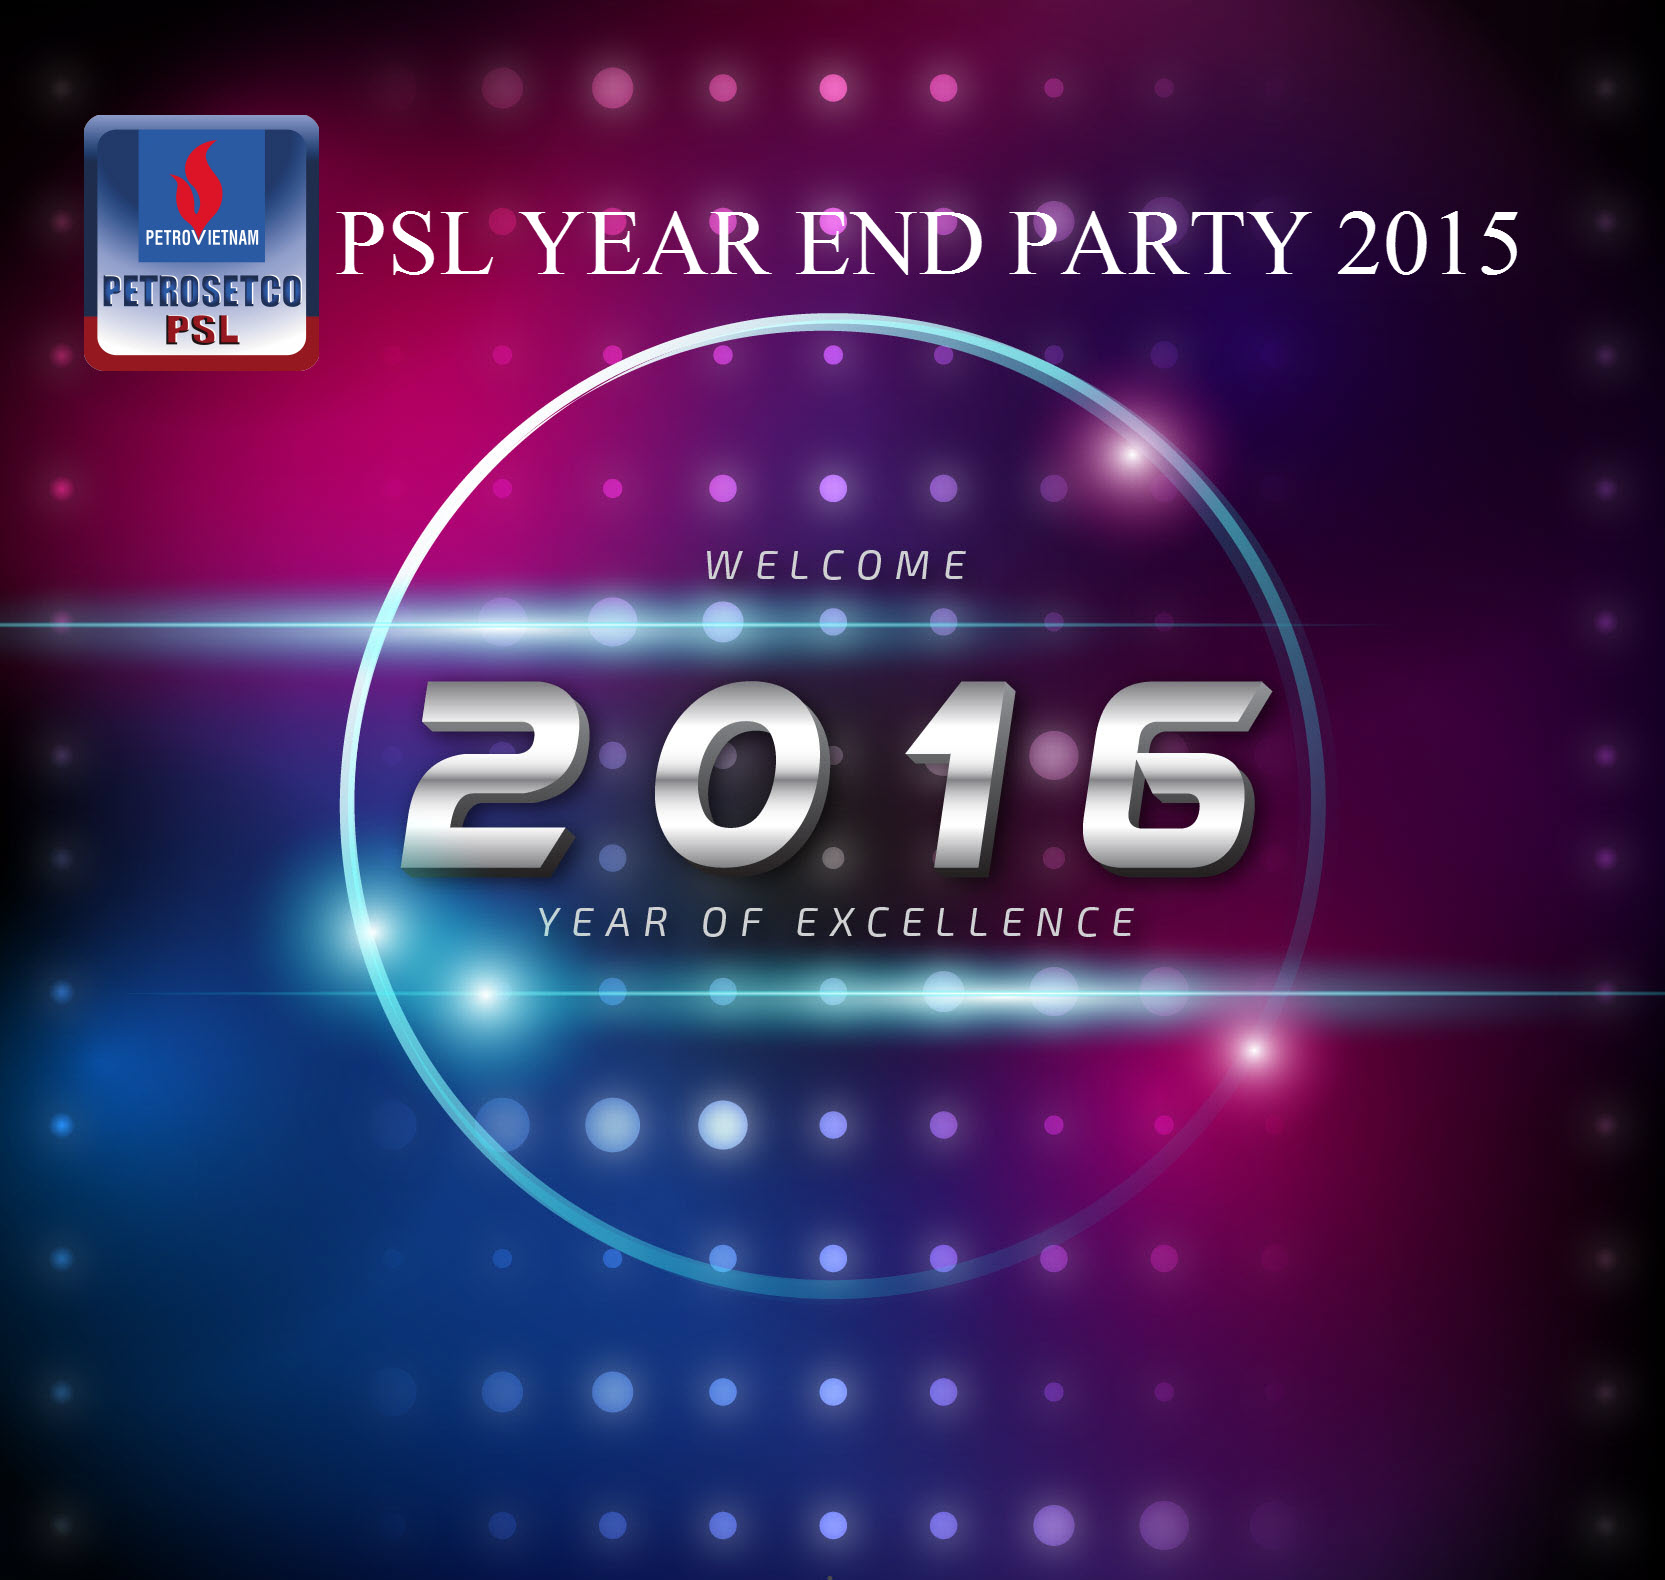 PSL Year End Party 2015